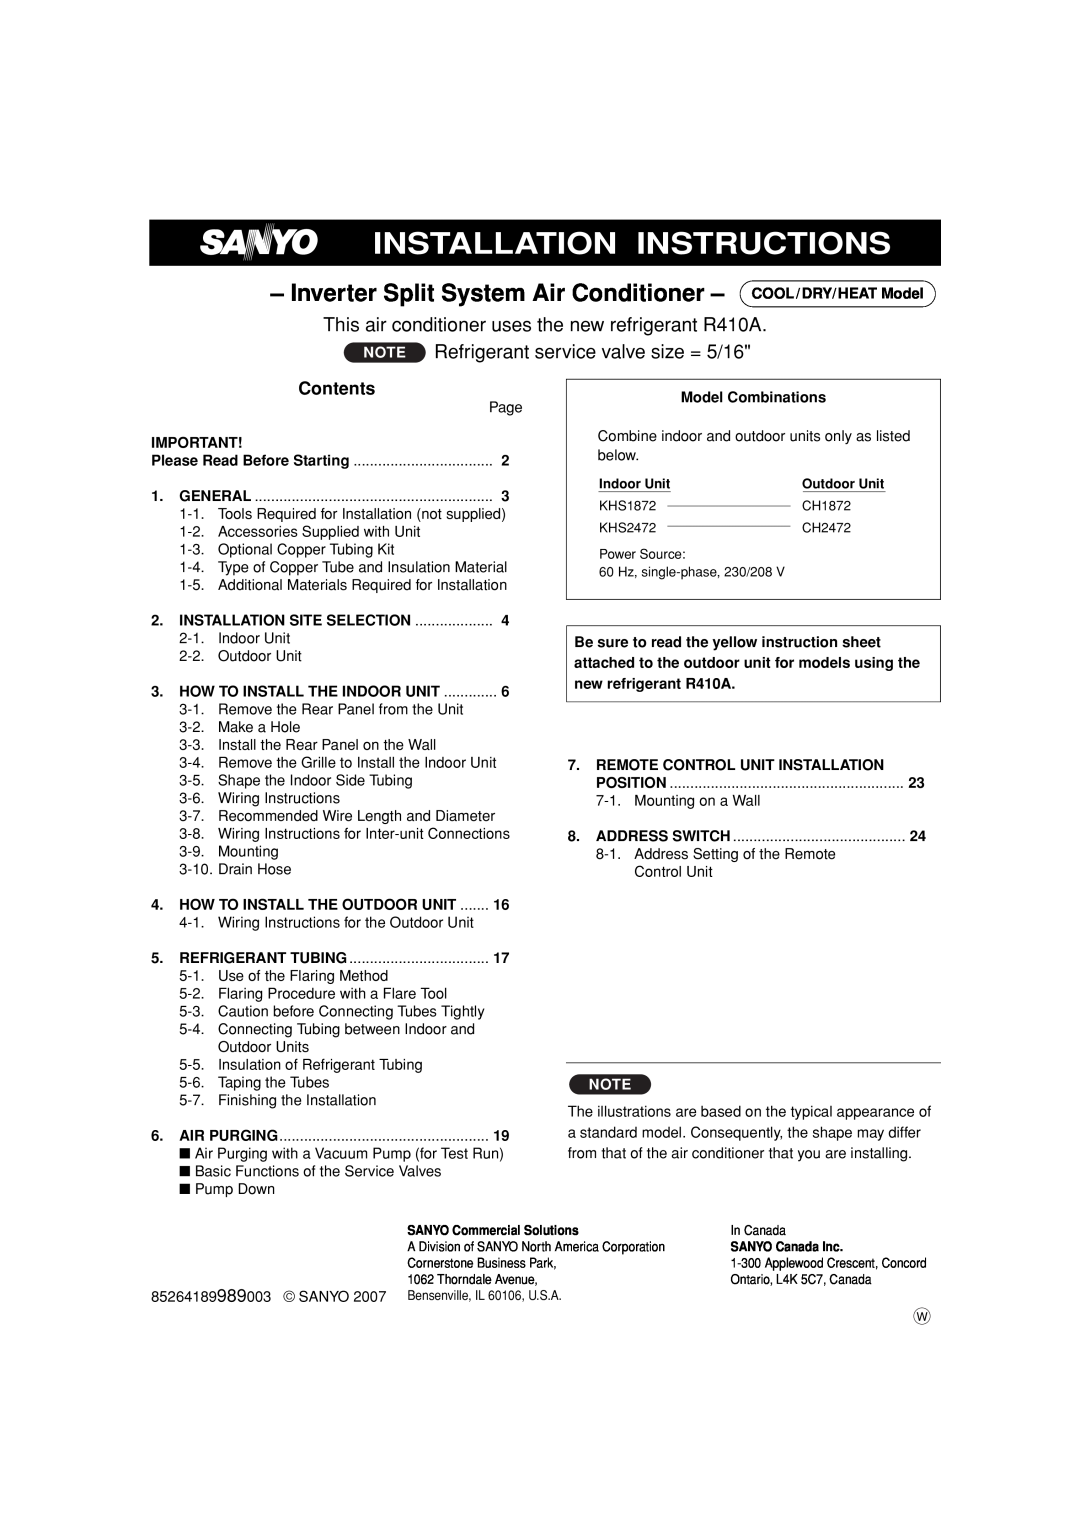 Sanyo CH1872, CH2472 service manual Contents, Installation Instructions, NOTE Refrigerant service valve size = 5/16 